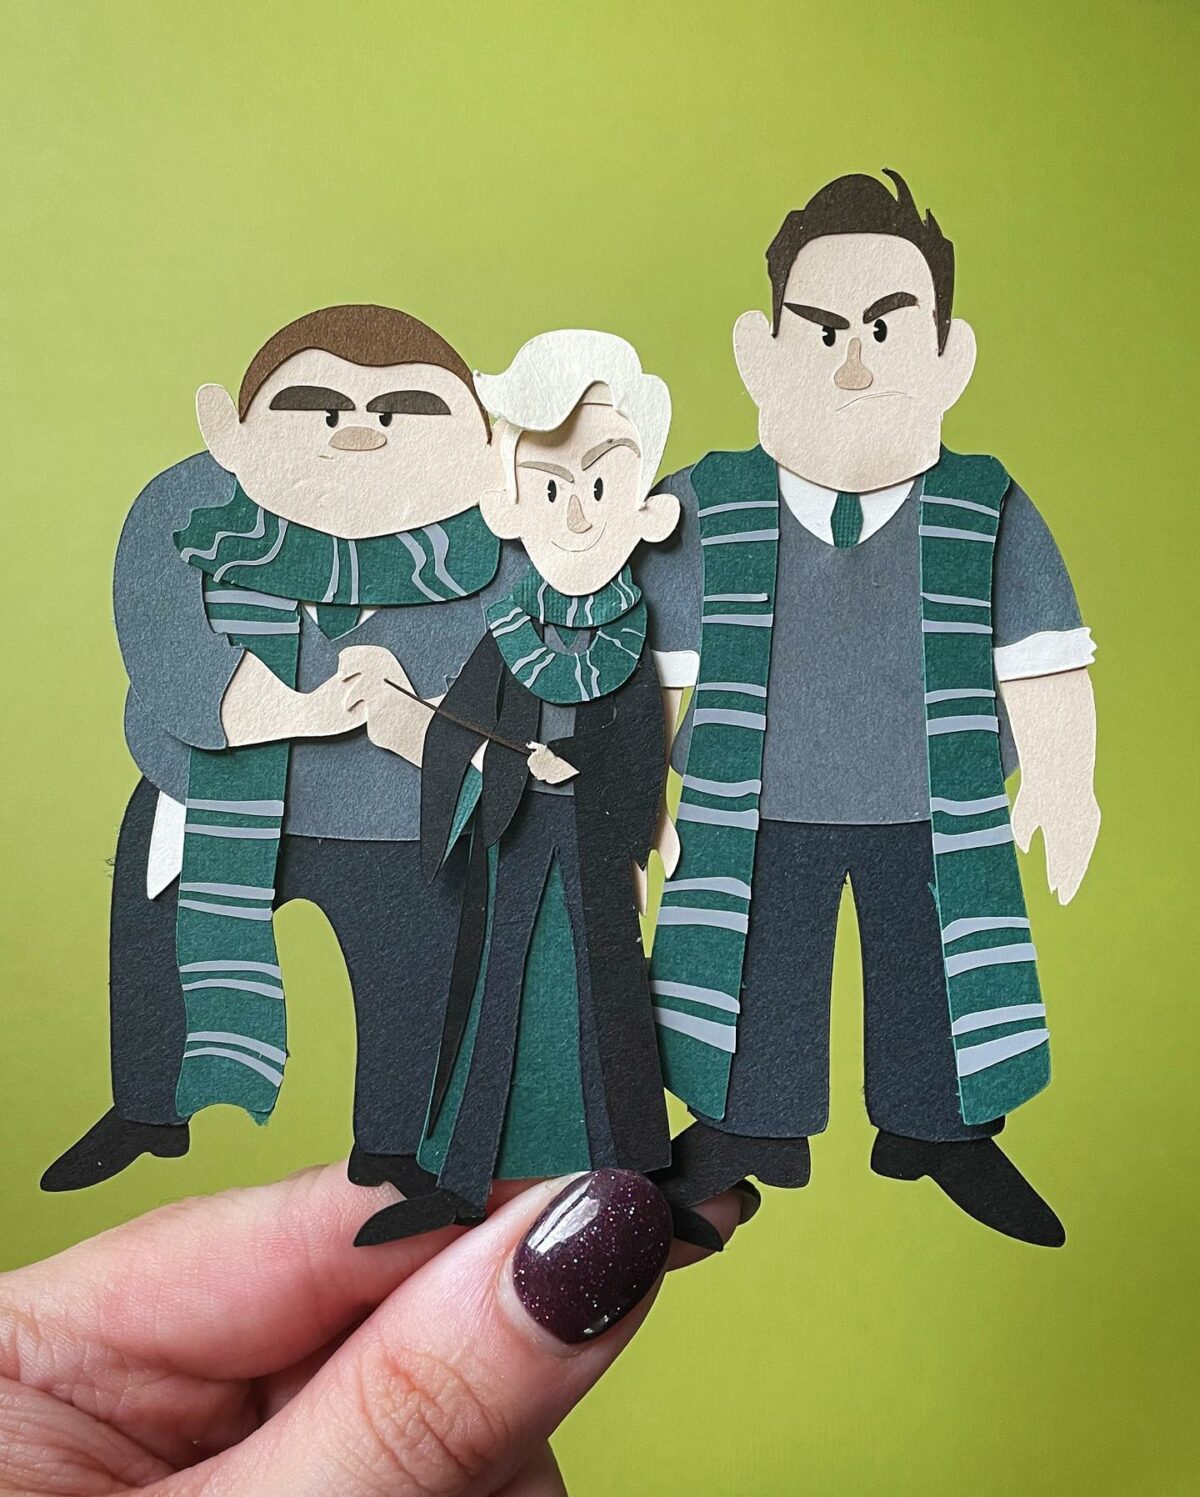 Adorable Paper Cuts Of Harry Potter Characters By Kristy Edgar 12